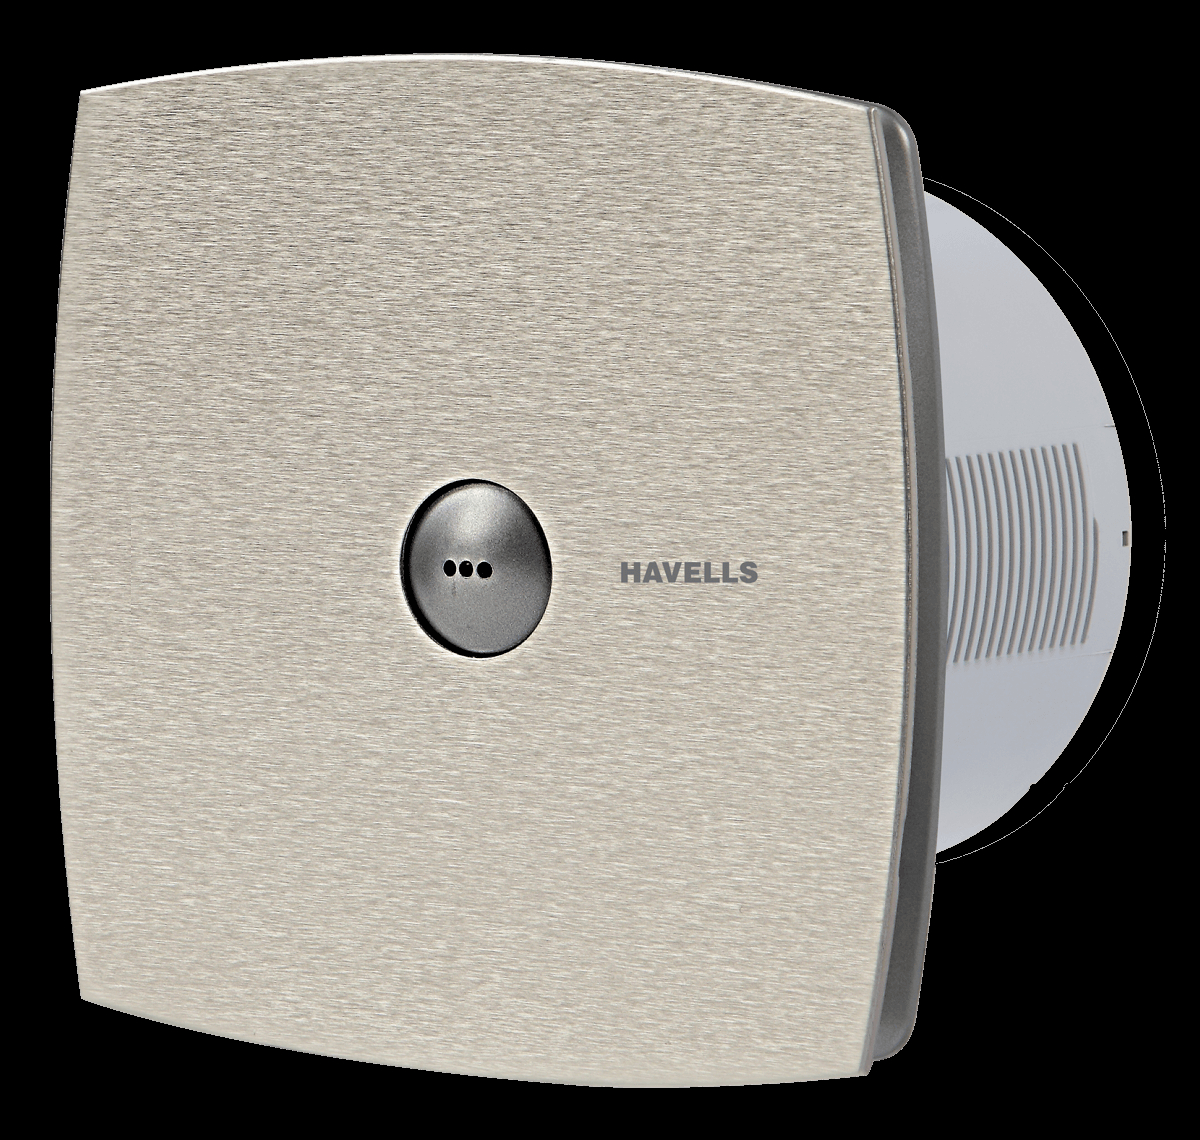 Vento Jet Domestic Exhaust Fan Havells India throughout sizing 1200 X 1140